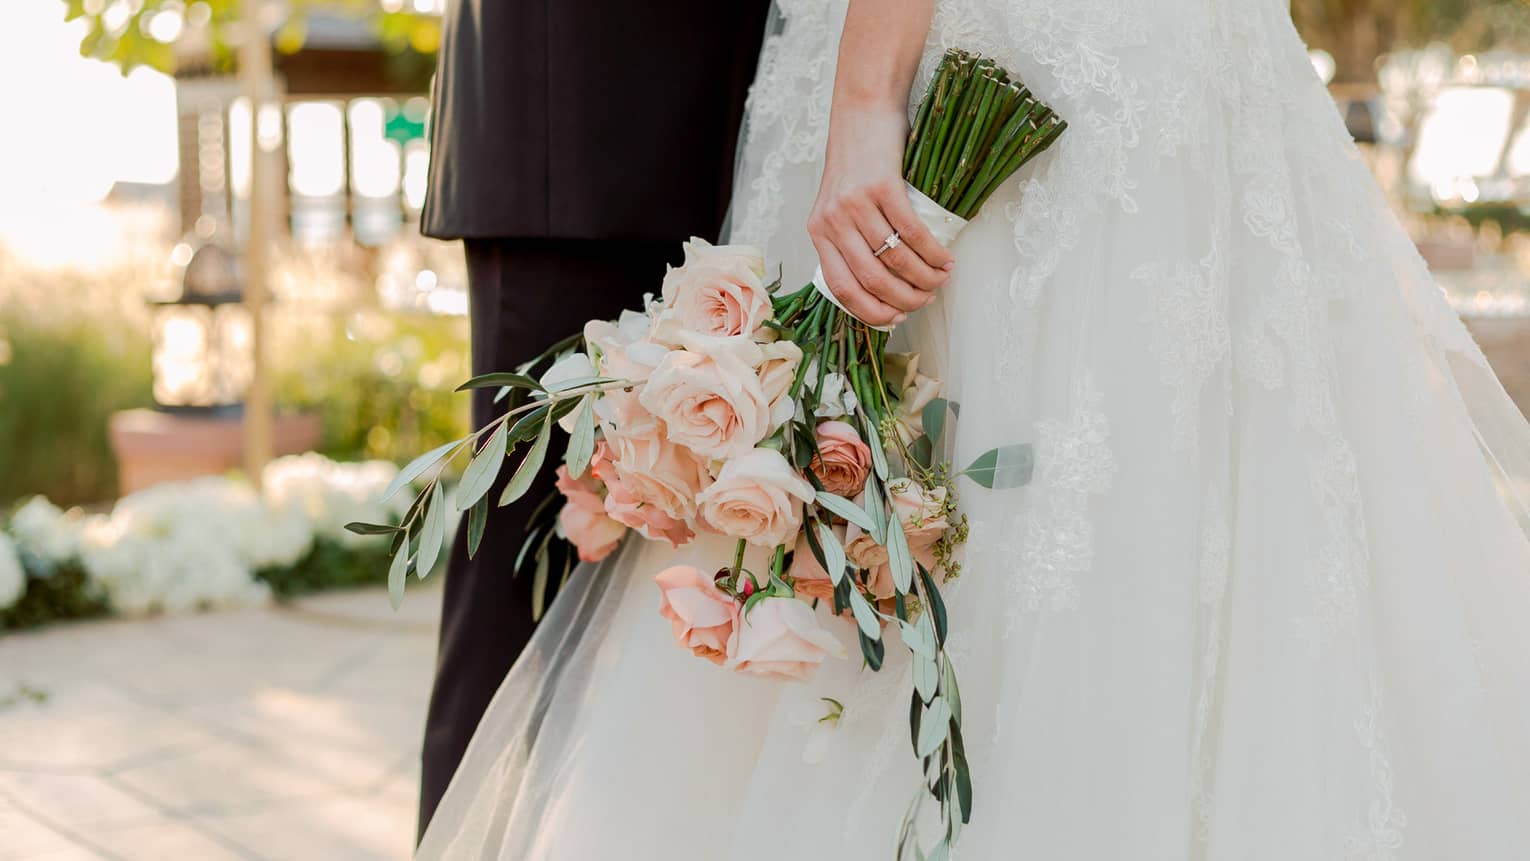 Groom and bride holding wedding floral bouquet of long-stemmed pink roses 